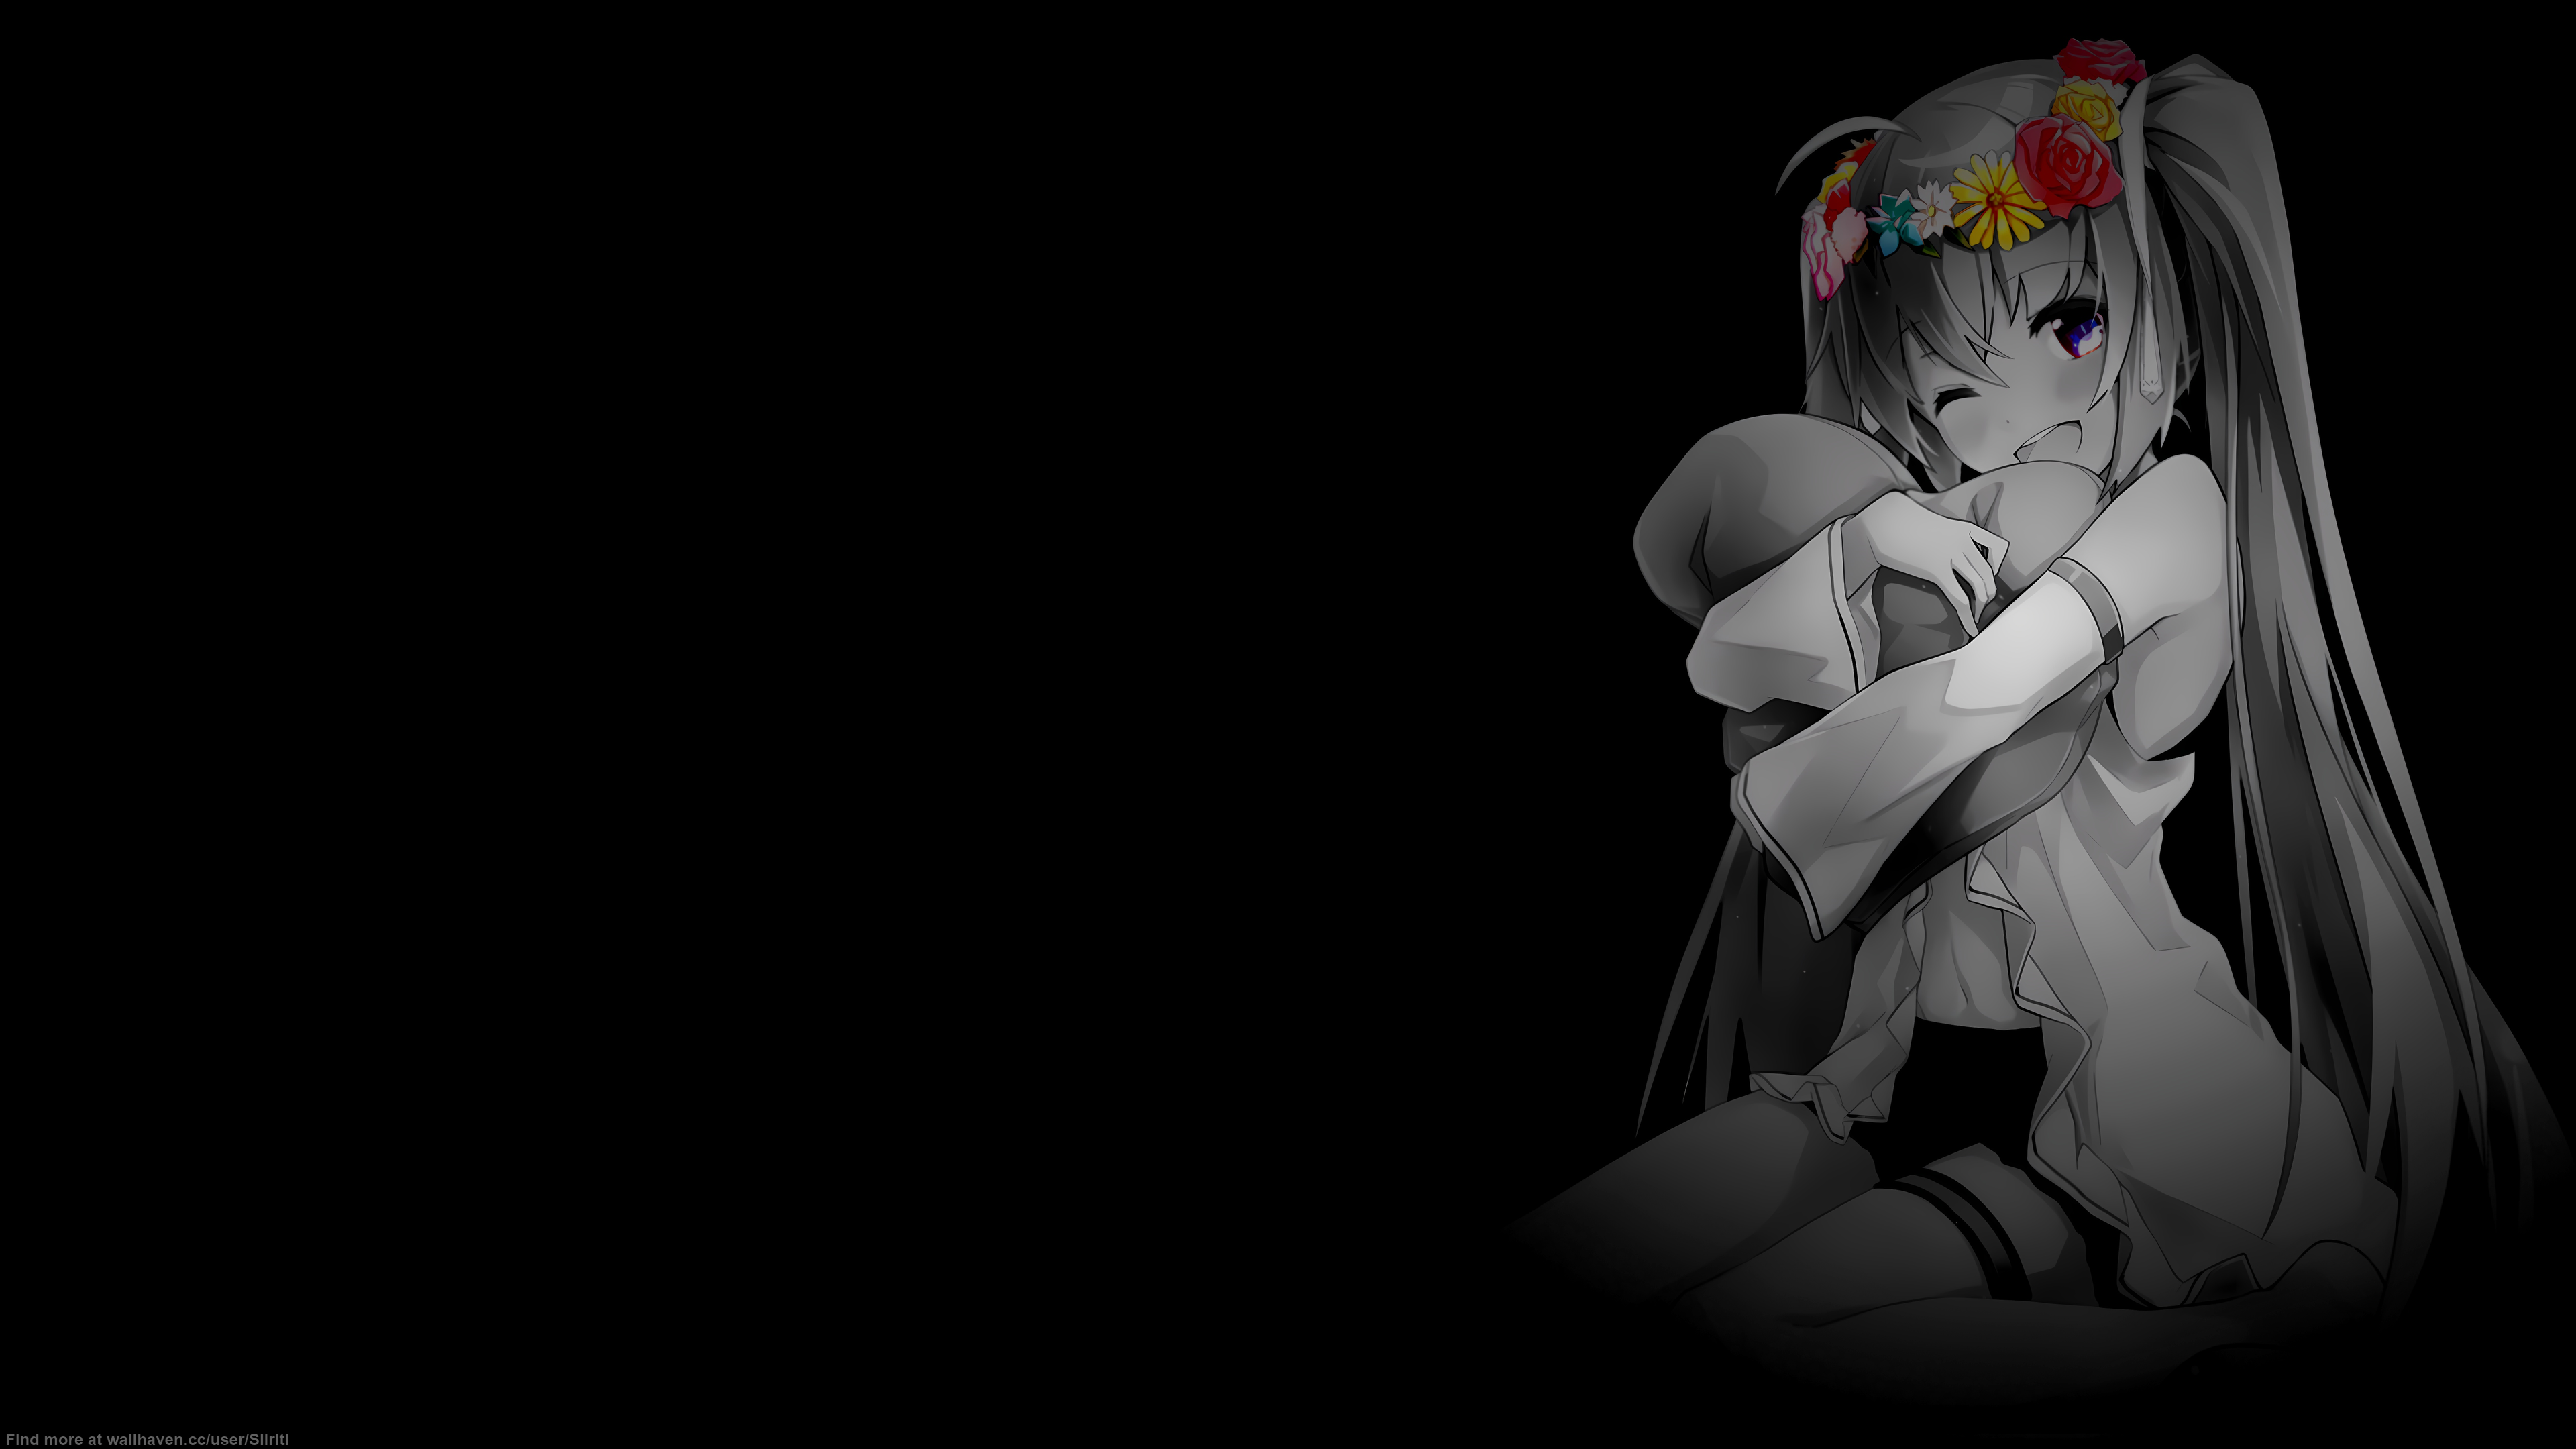 Anime 3840x2160 anime girls black background dark background simple background selective coloring flower in hair minimalism one eye closed twintails